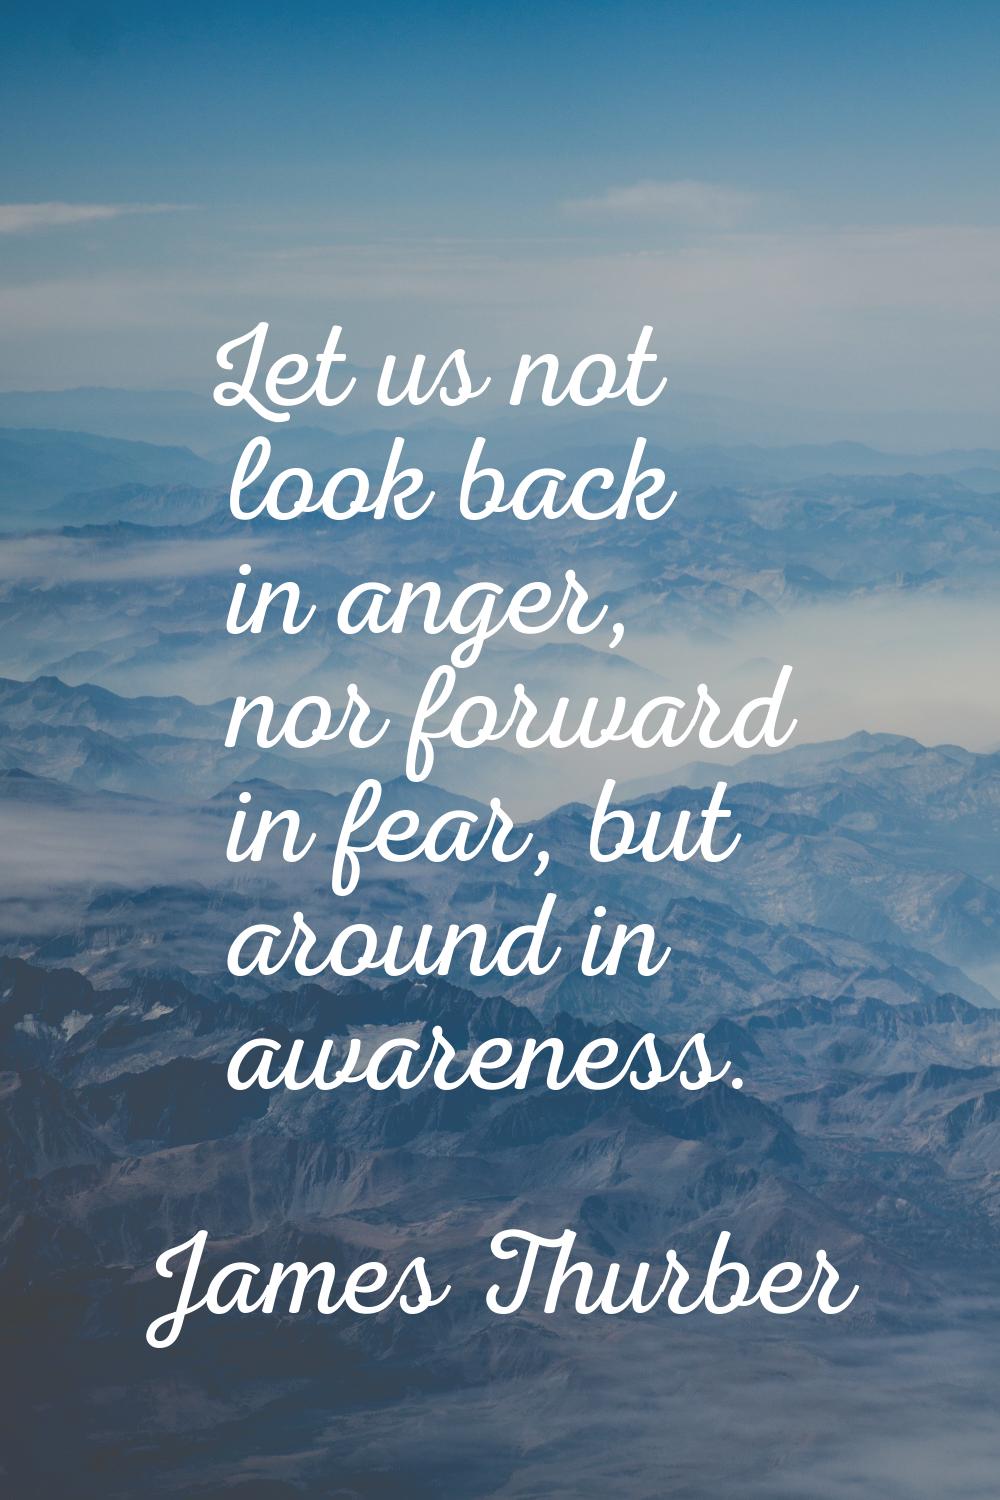 Let us not look back in anger, nor forward in fear, but around in awareness.